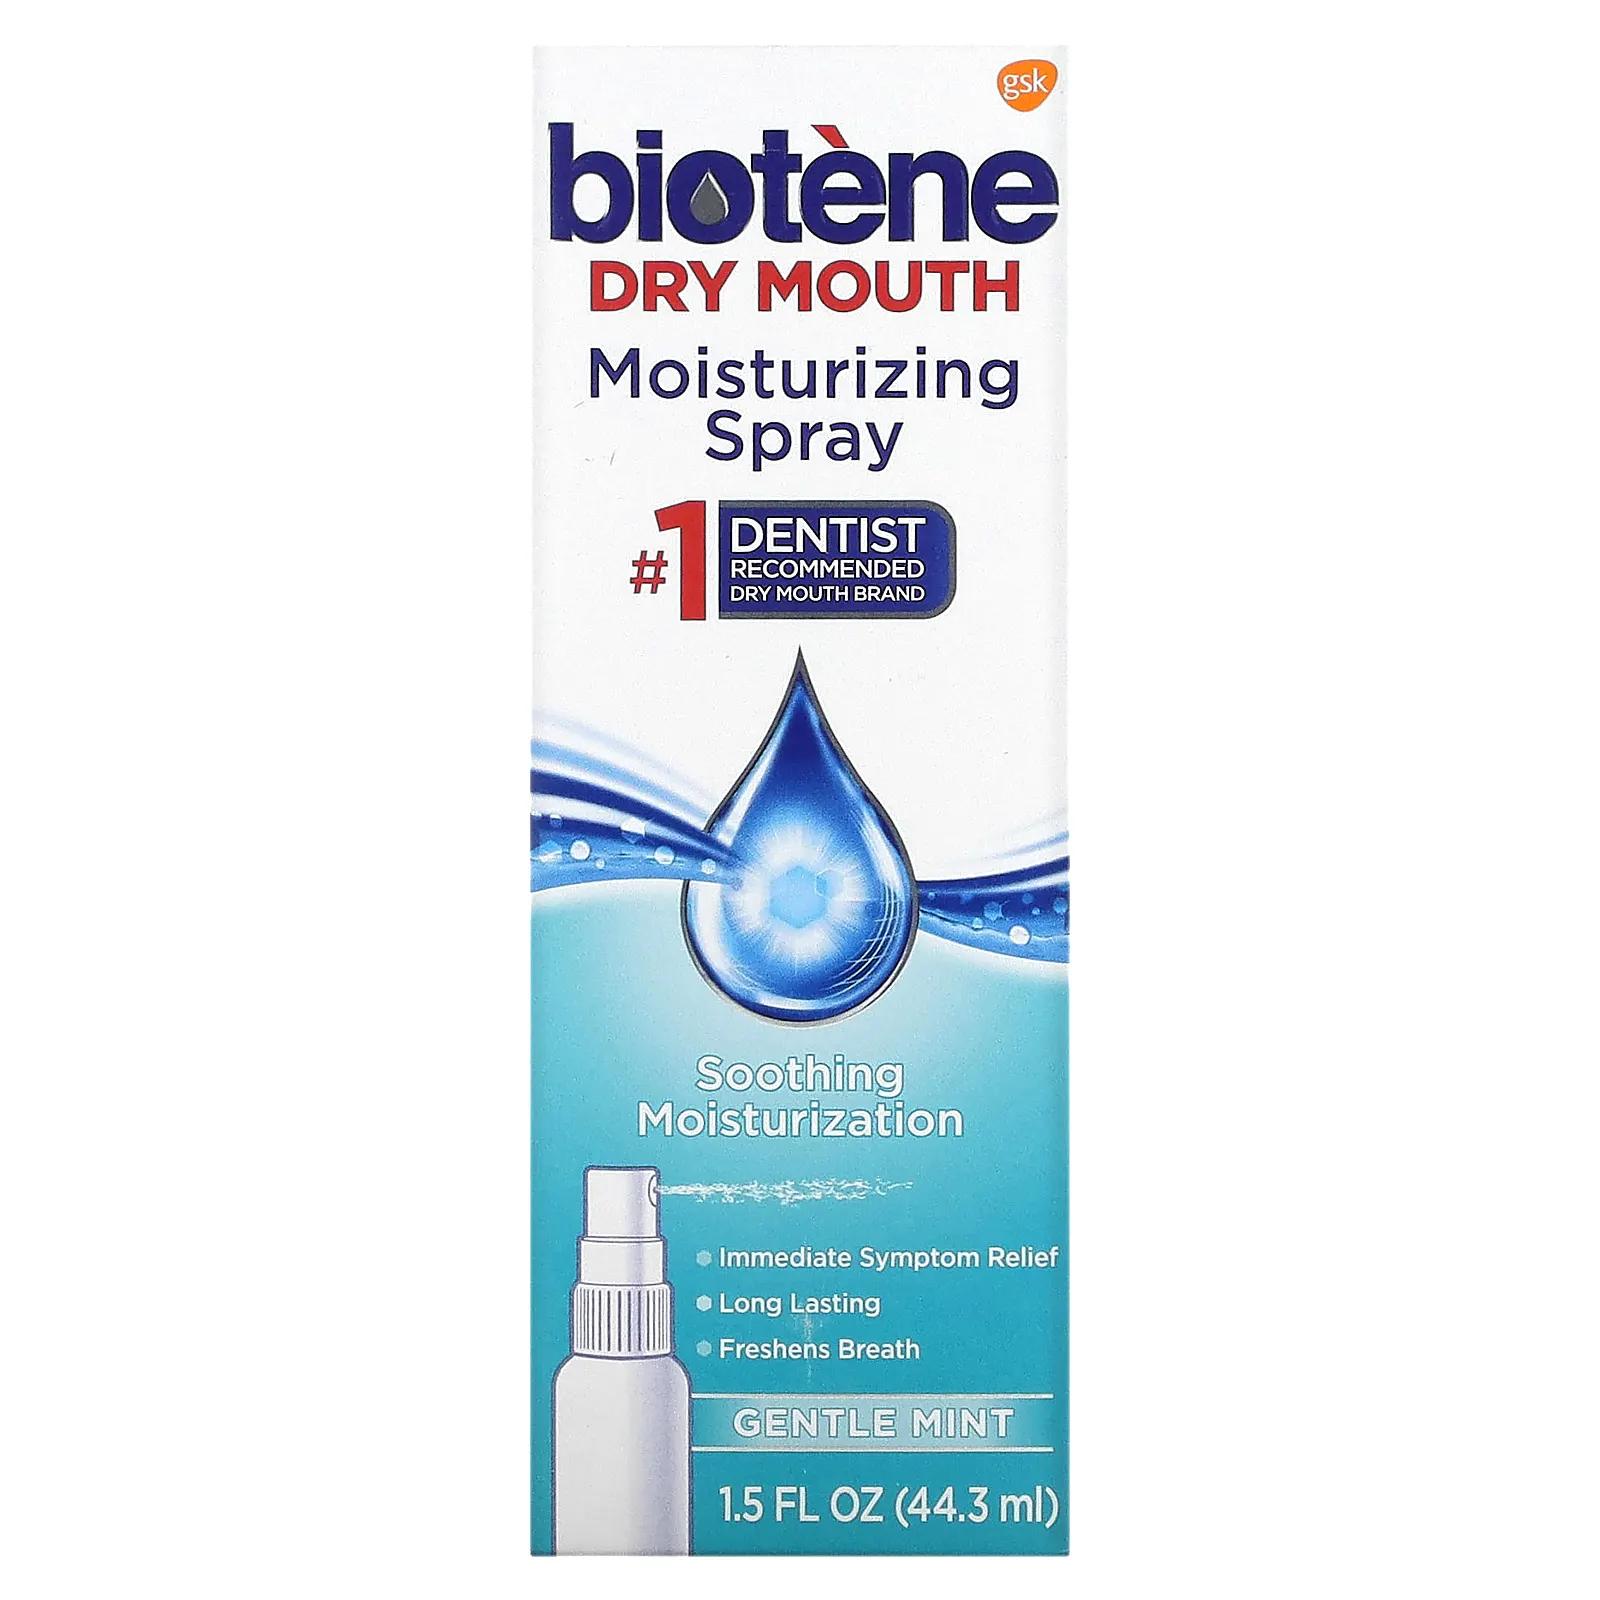 Biotene Dental Products Dry Mouth Moisturizing Spray Gentle Mint 1.5 fl oz (44.3 ml) 10pcs dental orthodontic lingual buttons dental products bondable composite round rect clear ceramic traction hook